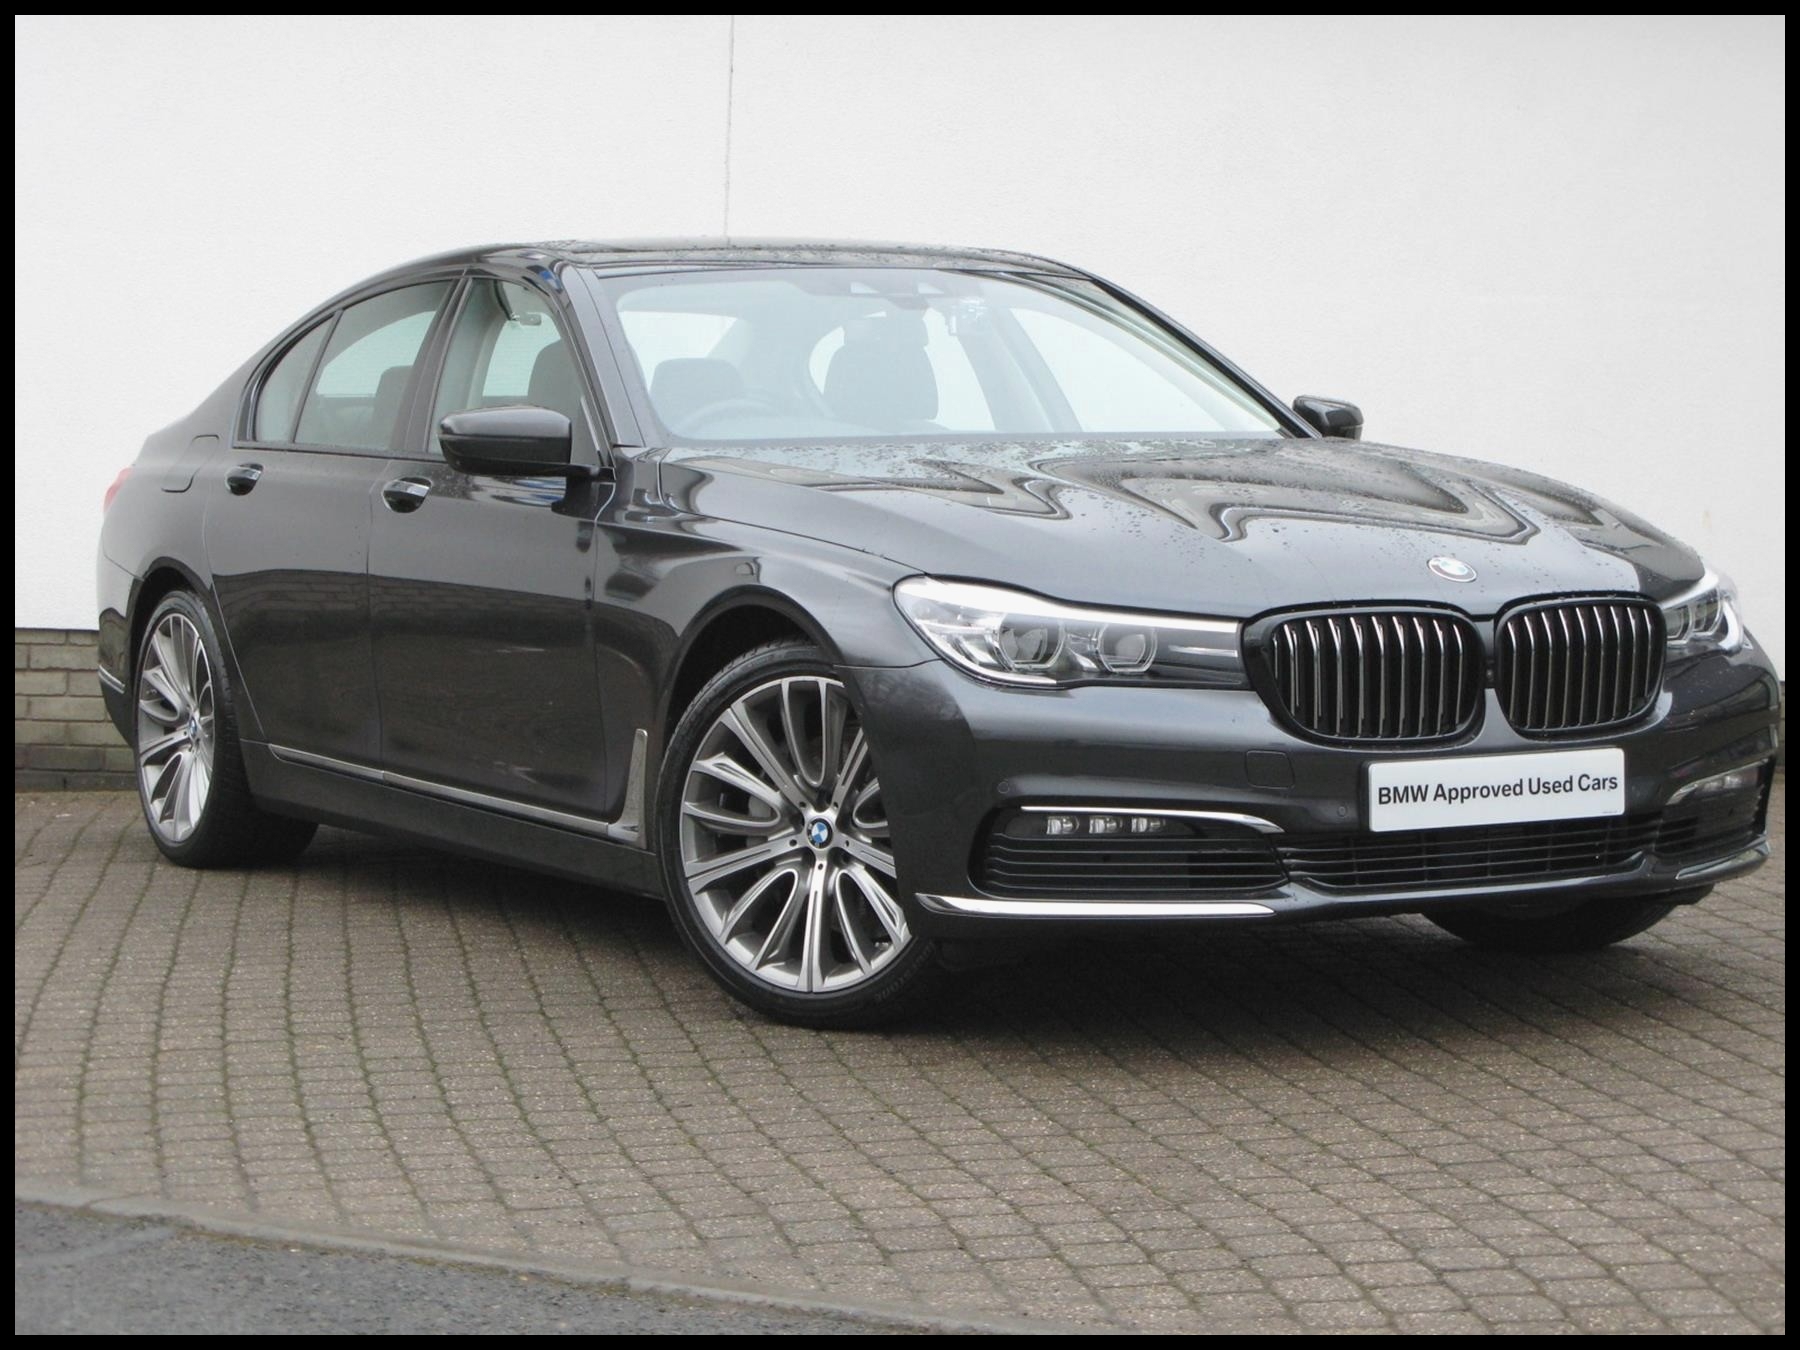 Bmw M7 for Sale Latest Used 2017 Bmw 7 Series G11 740d Xdrive Saloon B57 3